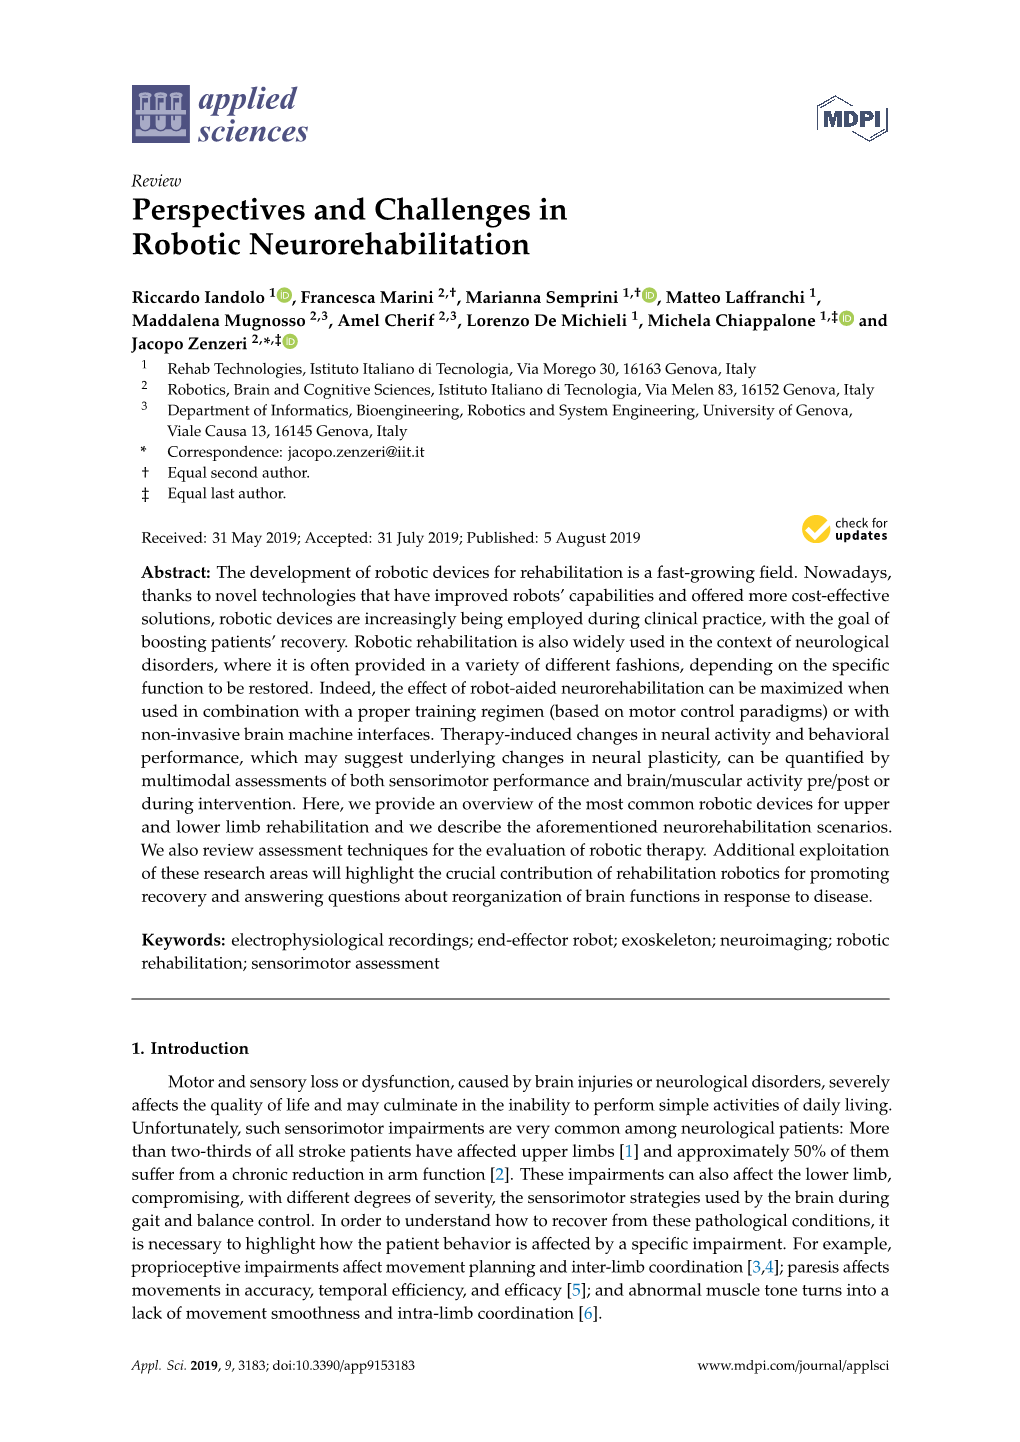 Perspectives and Challenges in Robotic Neurorehabilitation